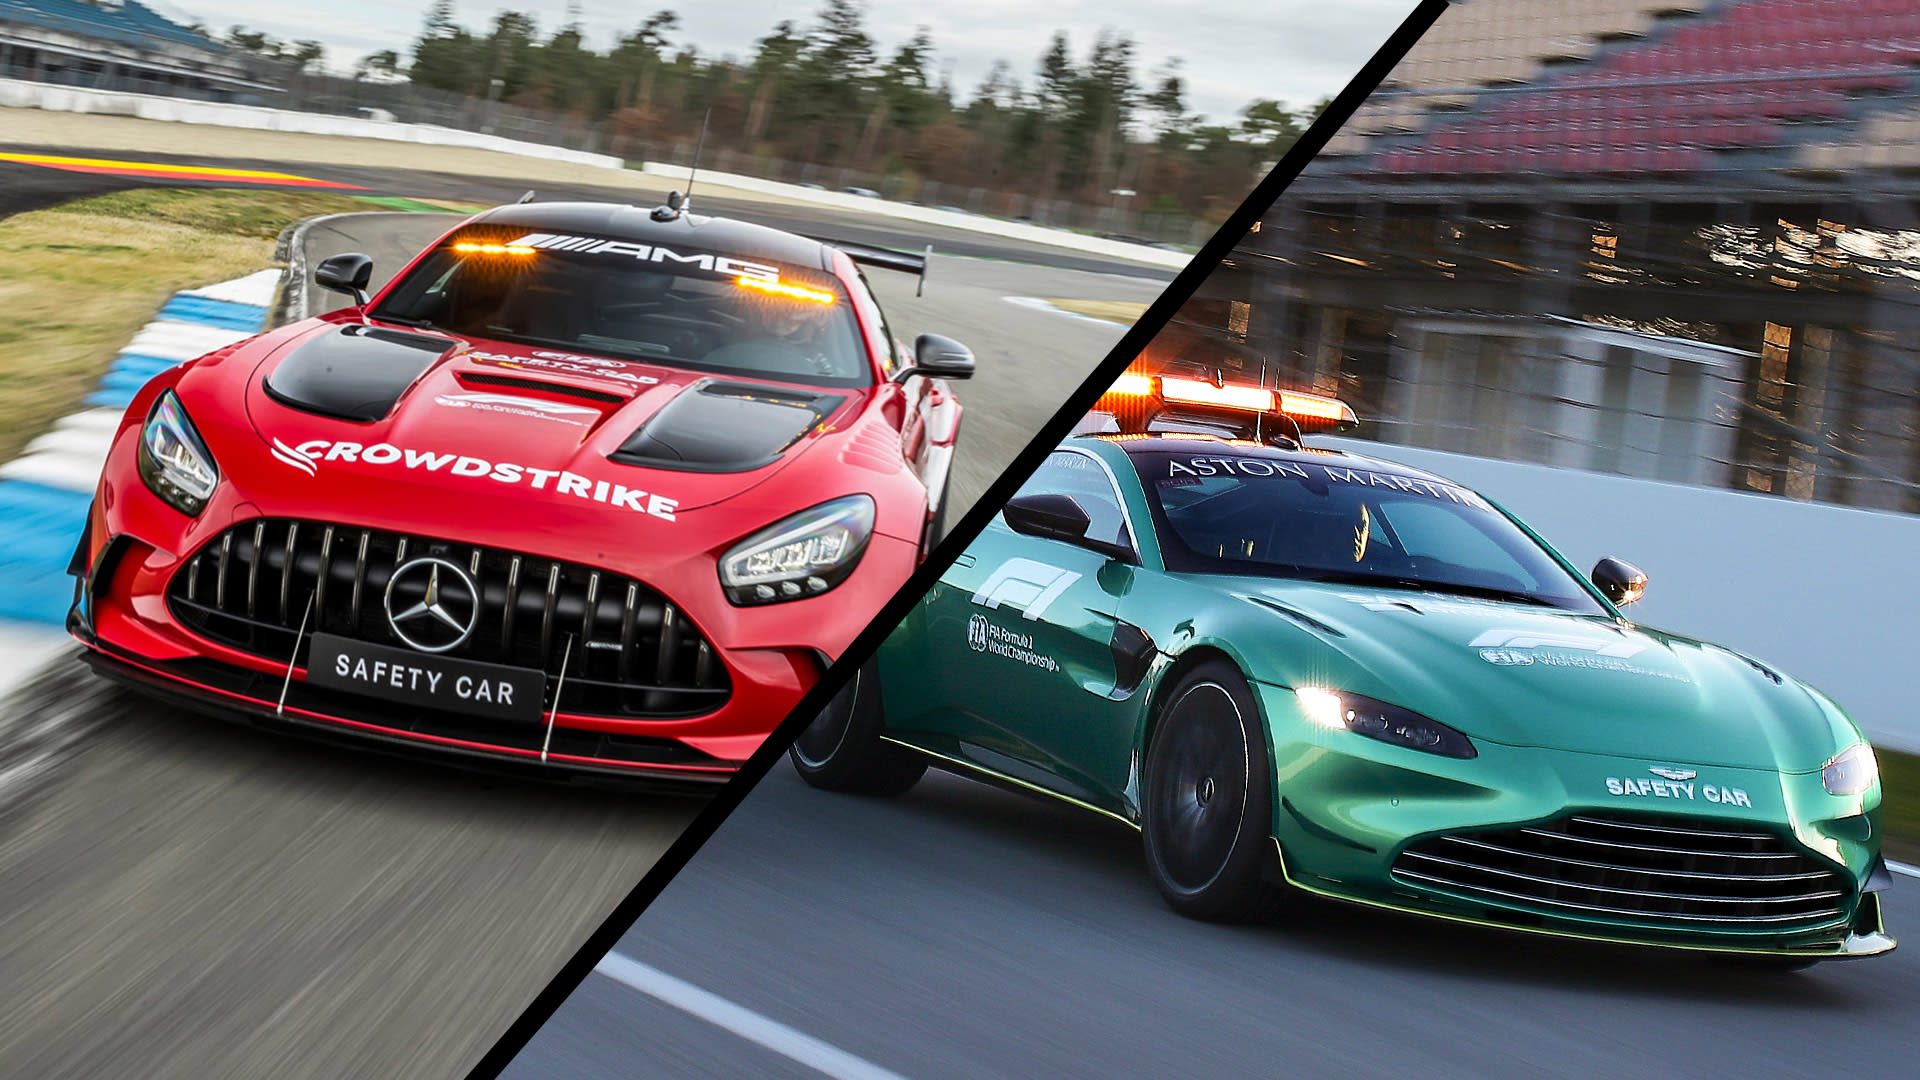 GALLERY: View the brand-new 2022 Mercedes AMG and Aston Martin Safety Cars  | Formula 1®